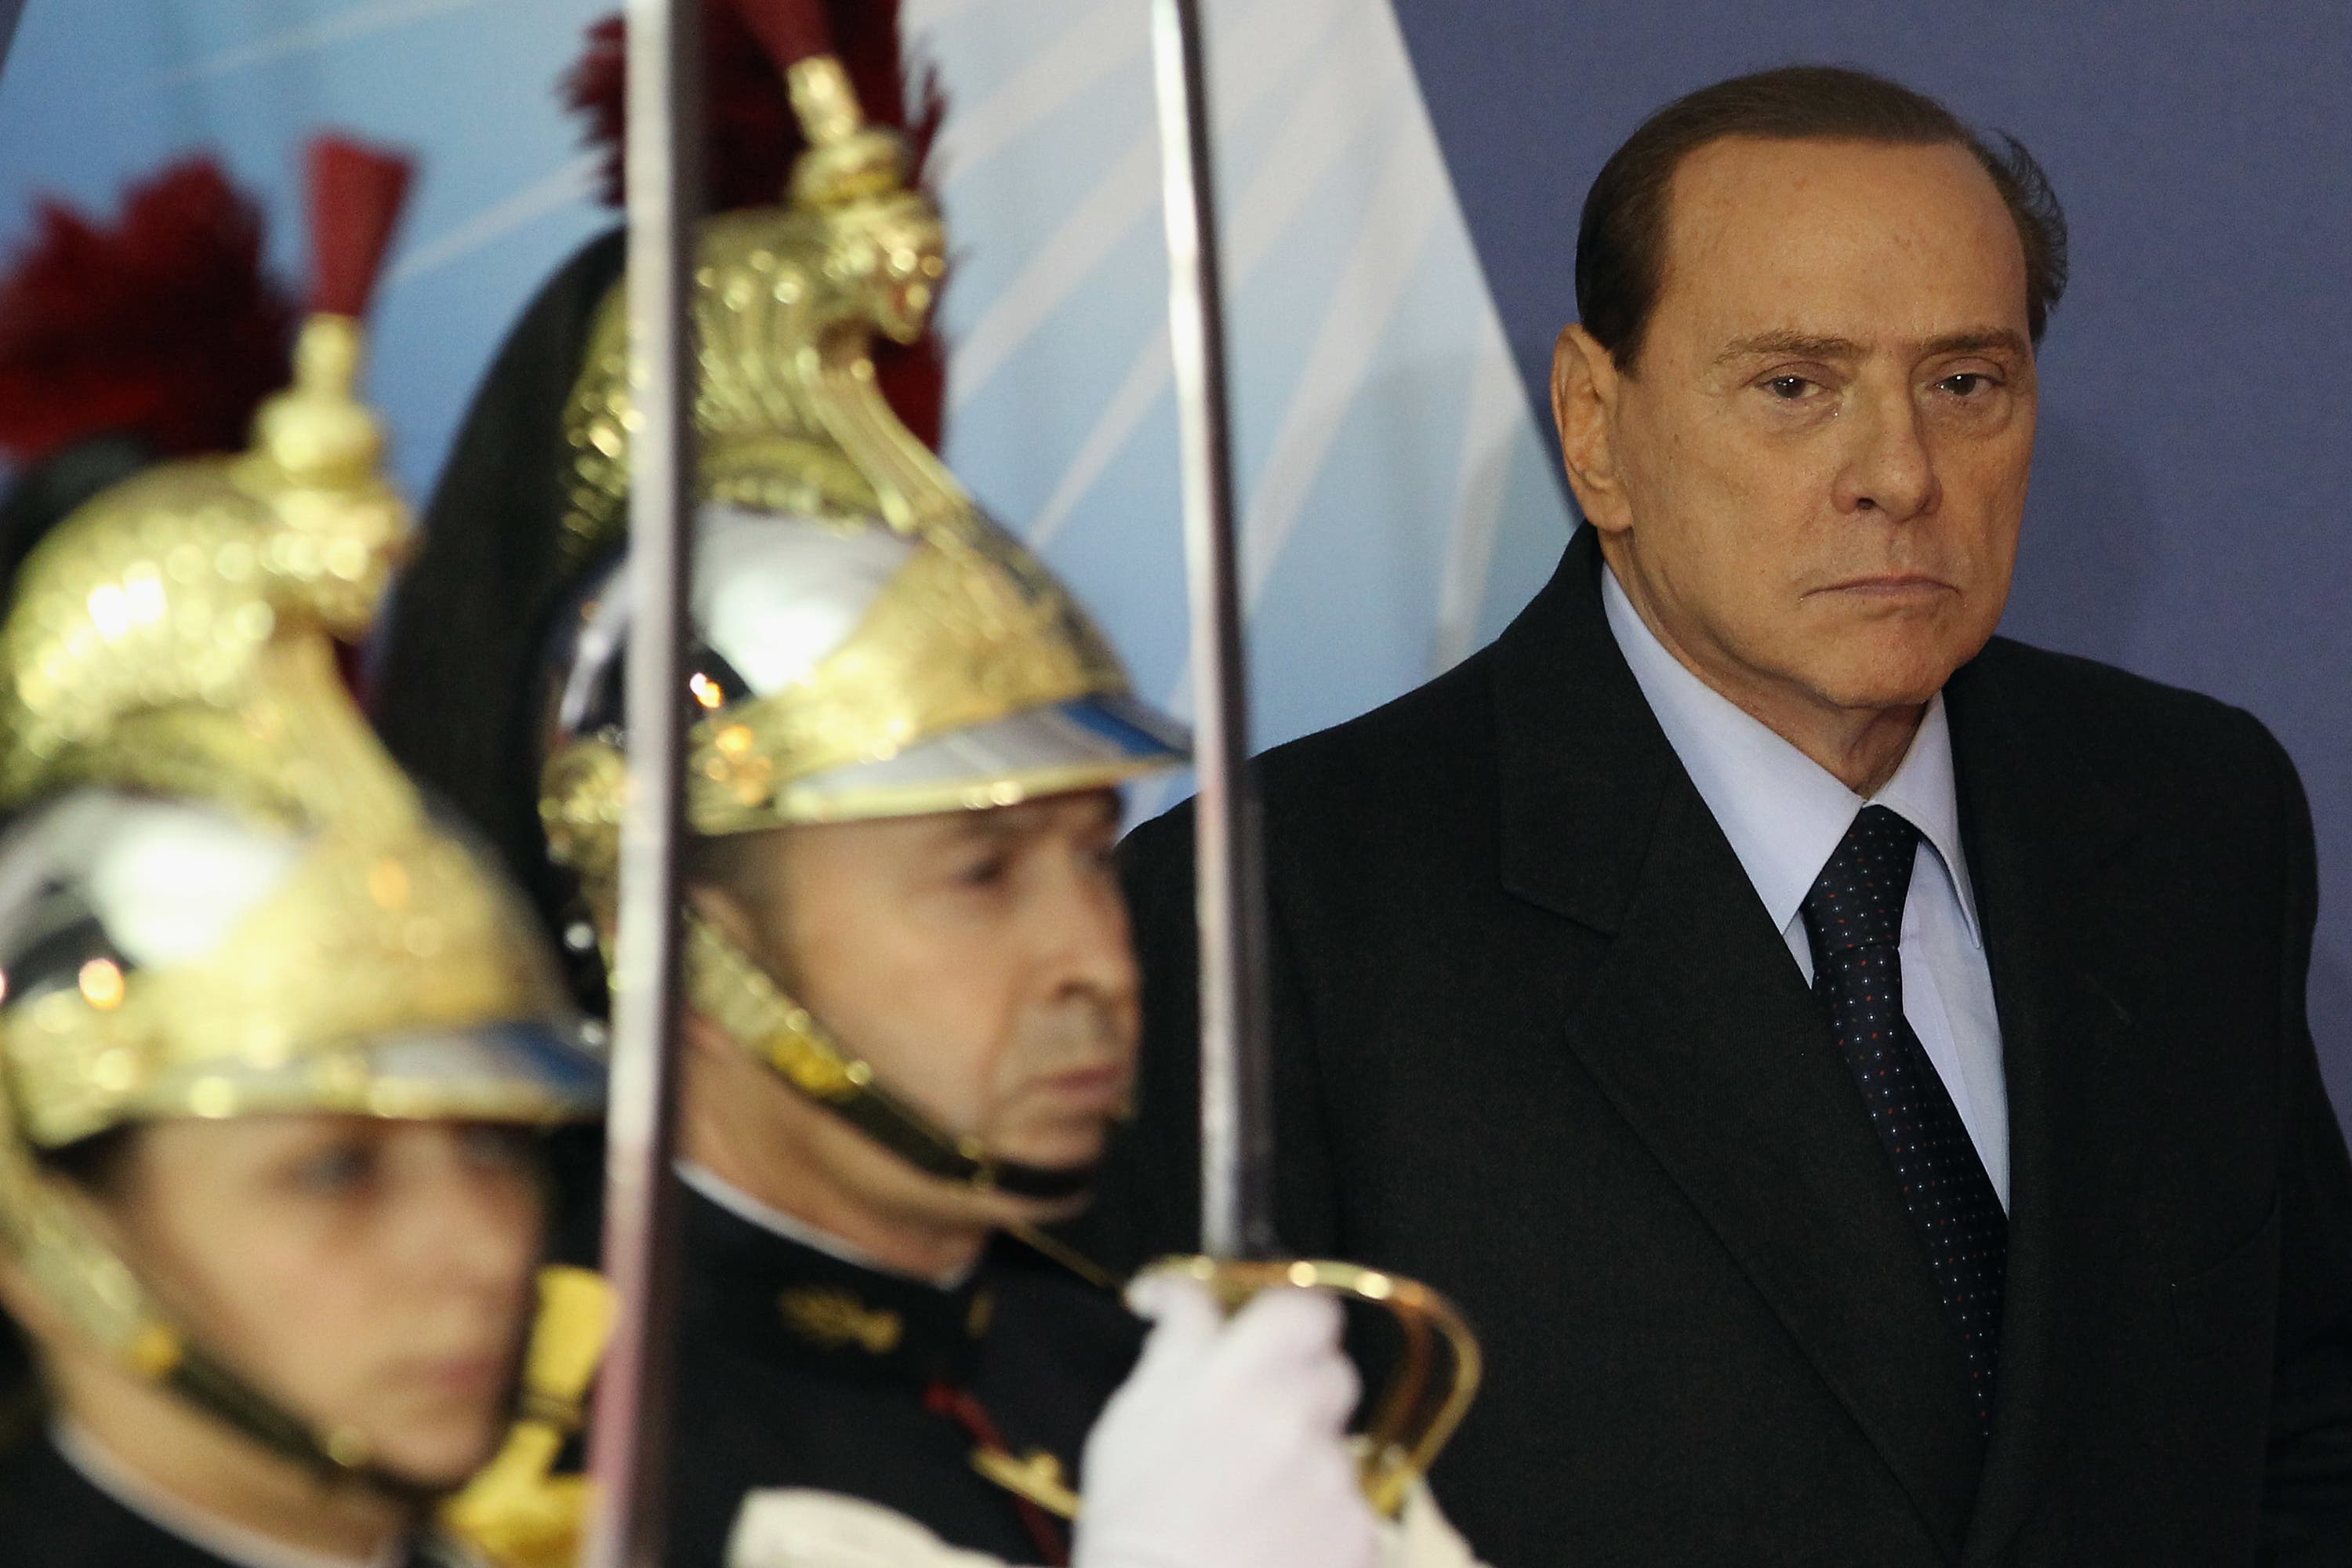 Silvio Berlusconi pictured at a G20 summit in France.